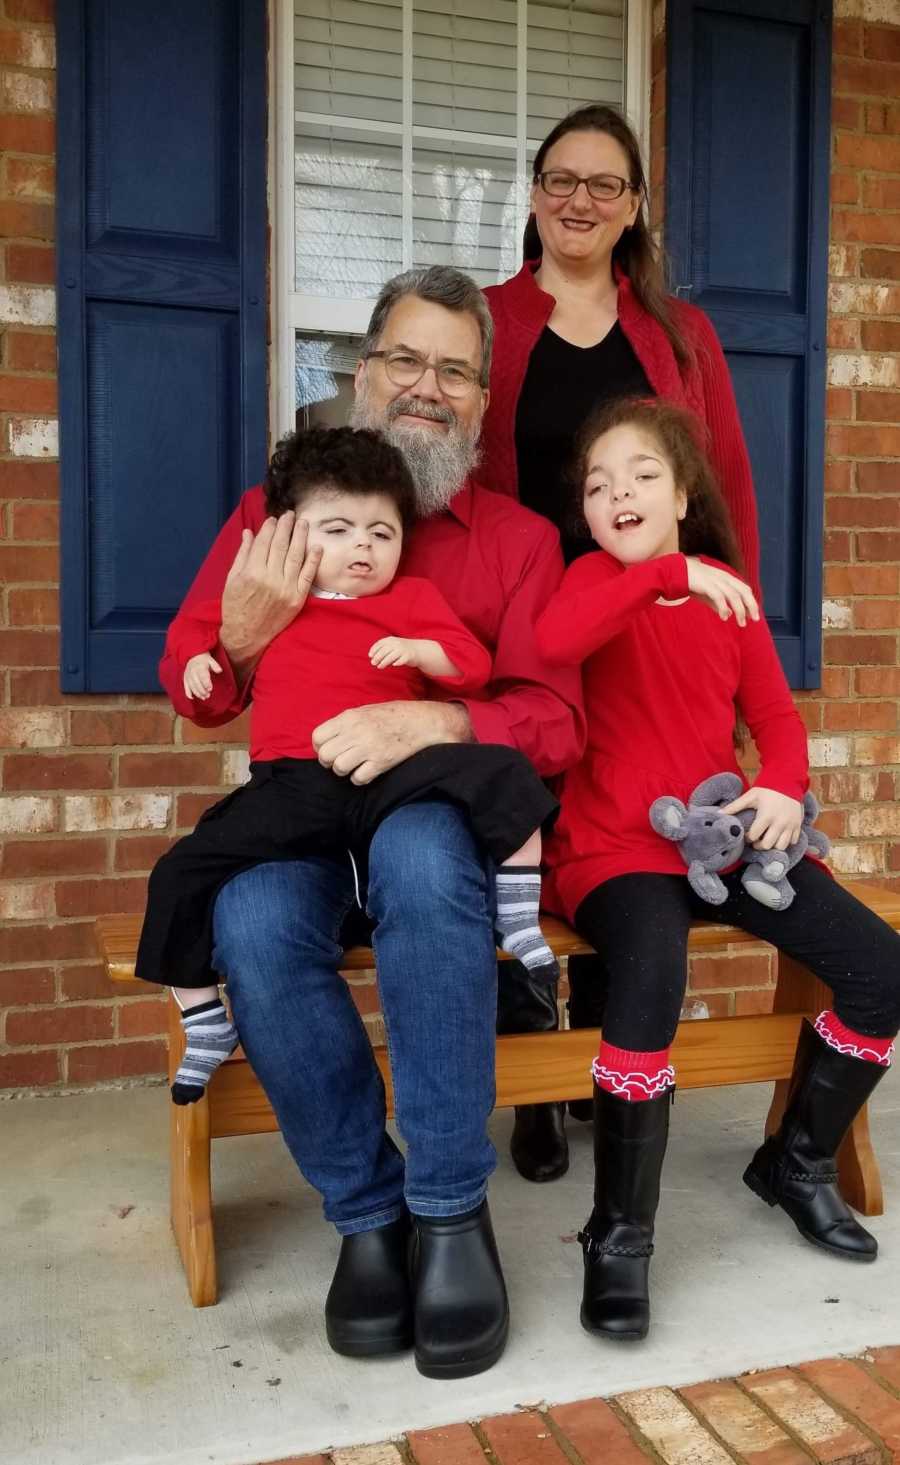 Man sits on bench outside of home with foster son and daughter while man's wife stands behind them